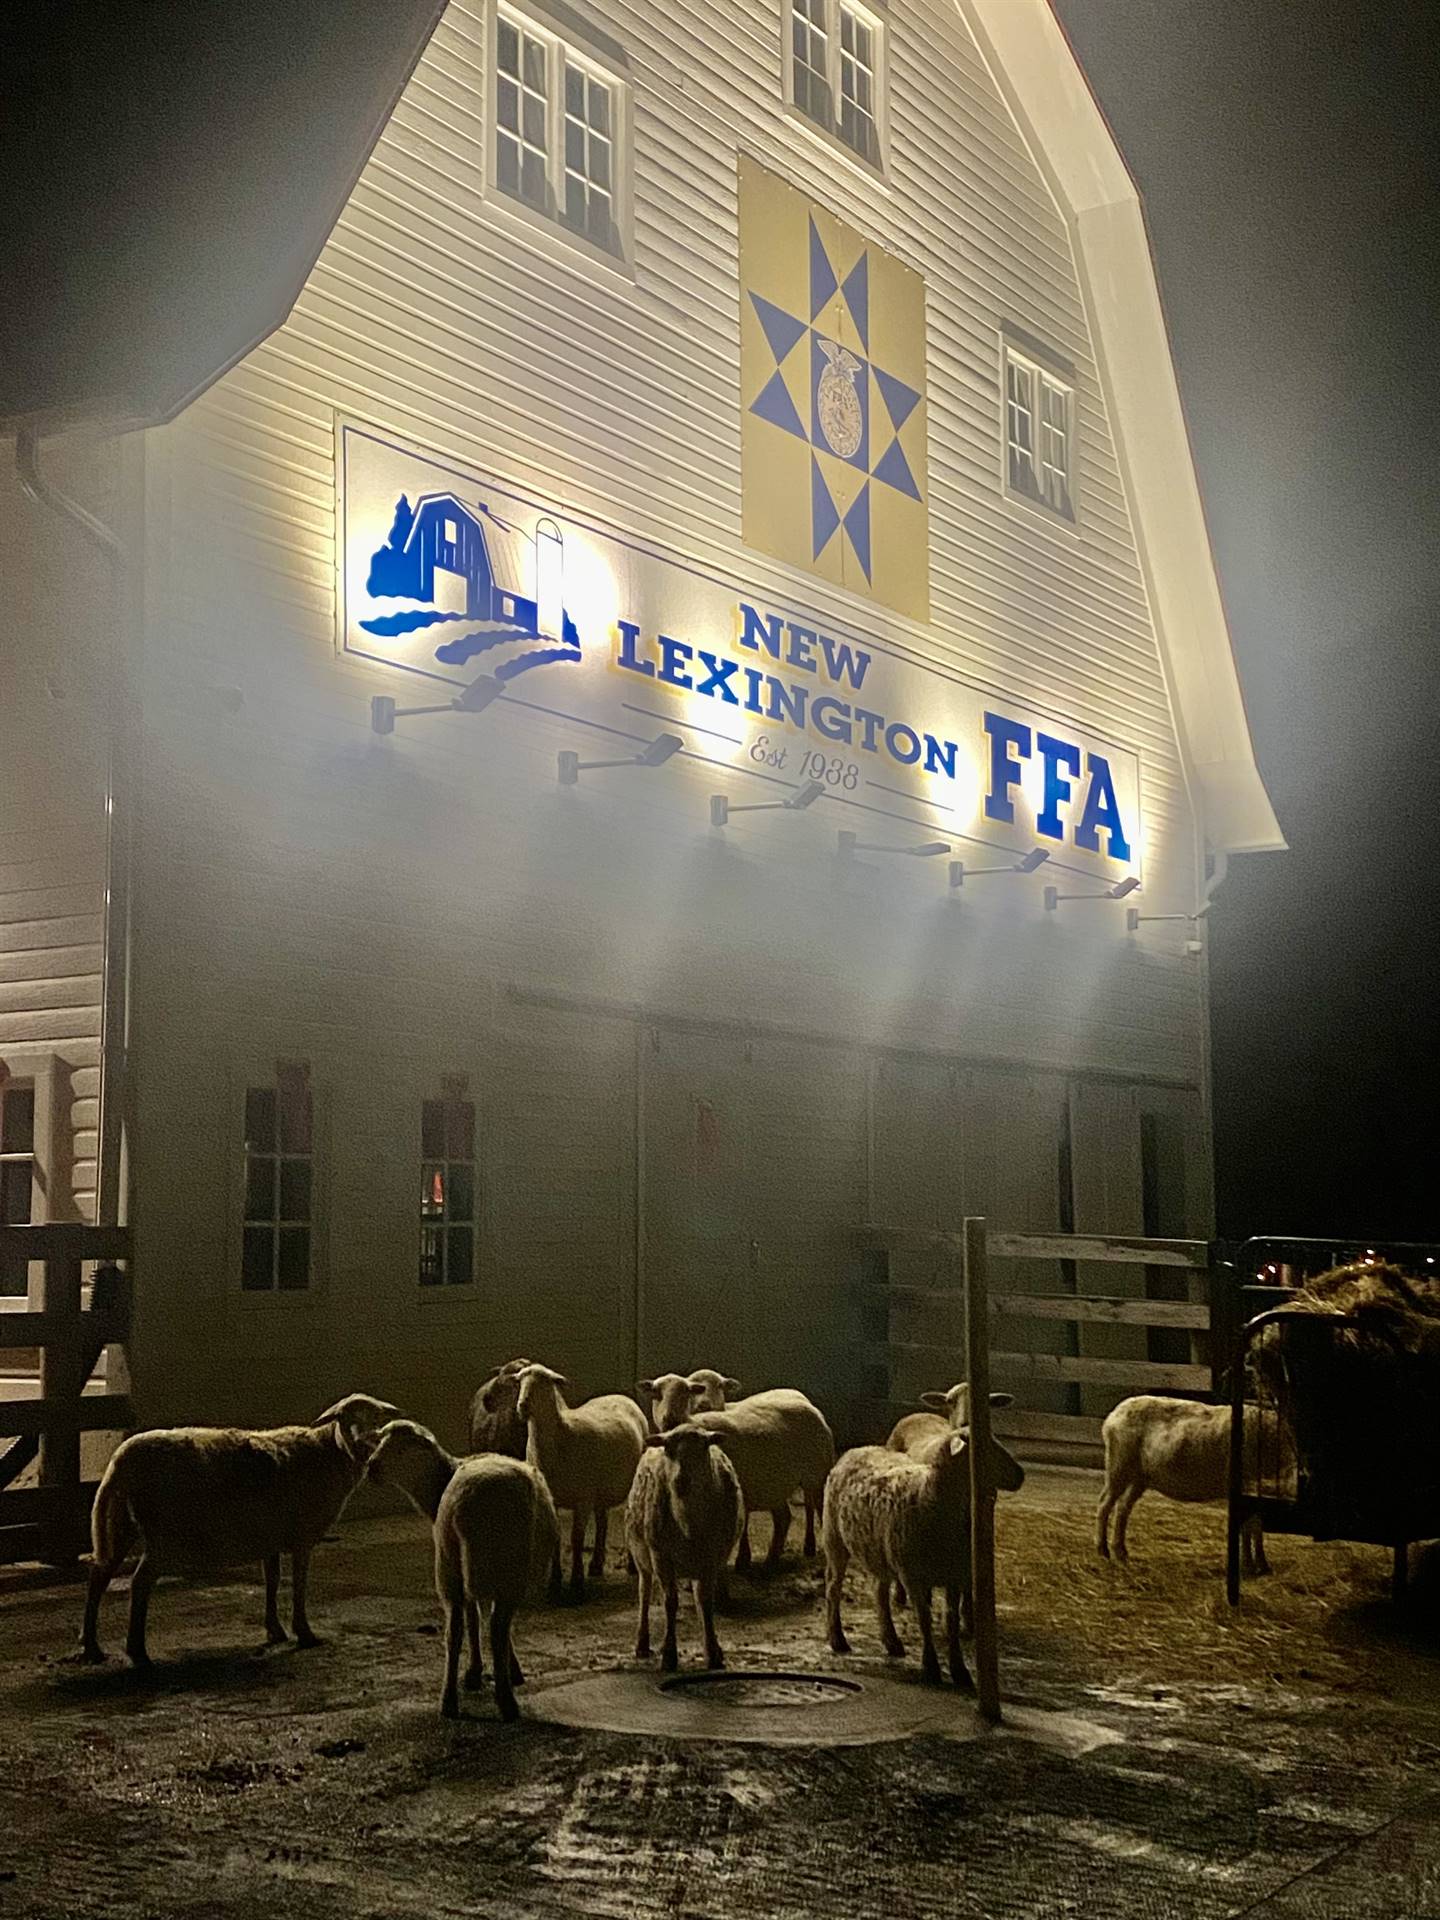 FFA adds 10 new Ewes to the Barn